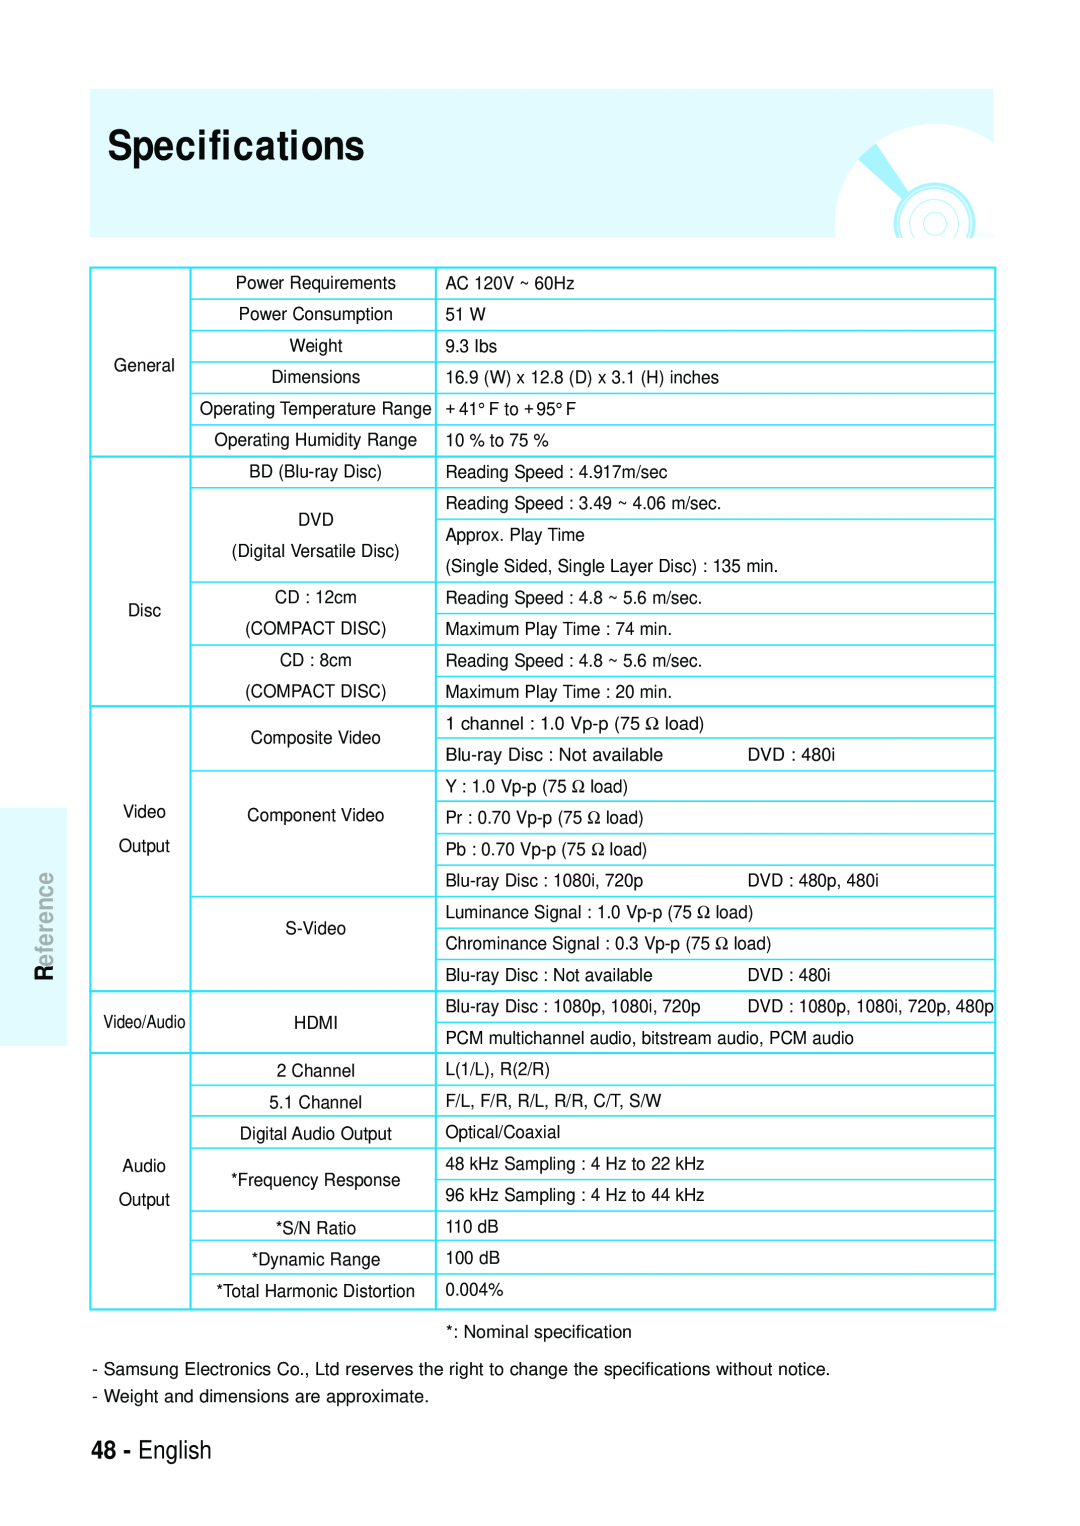 Samsung Blu-ray Disc manual Specifications, English 